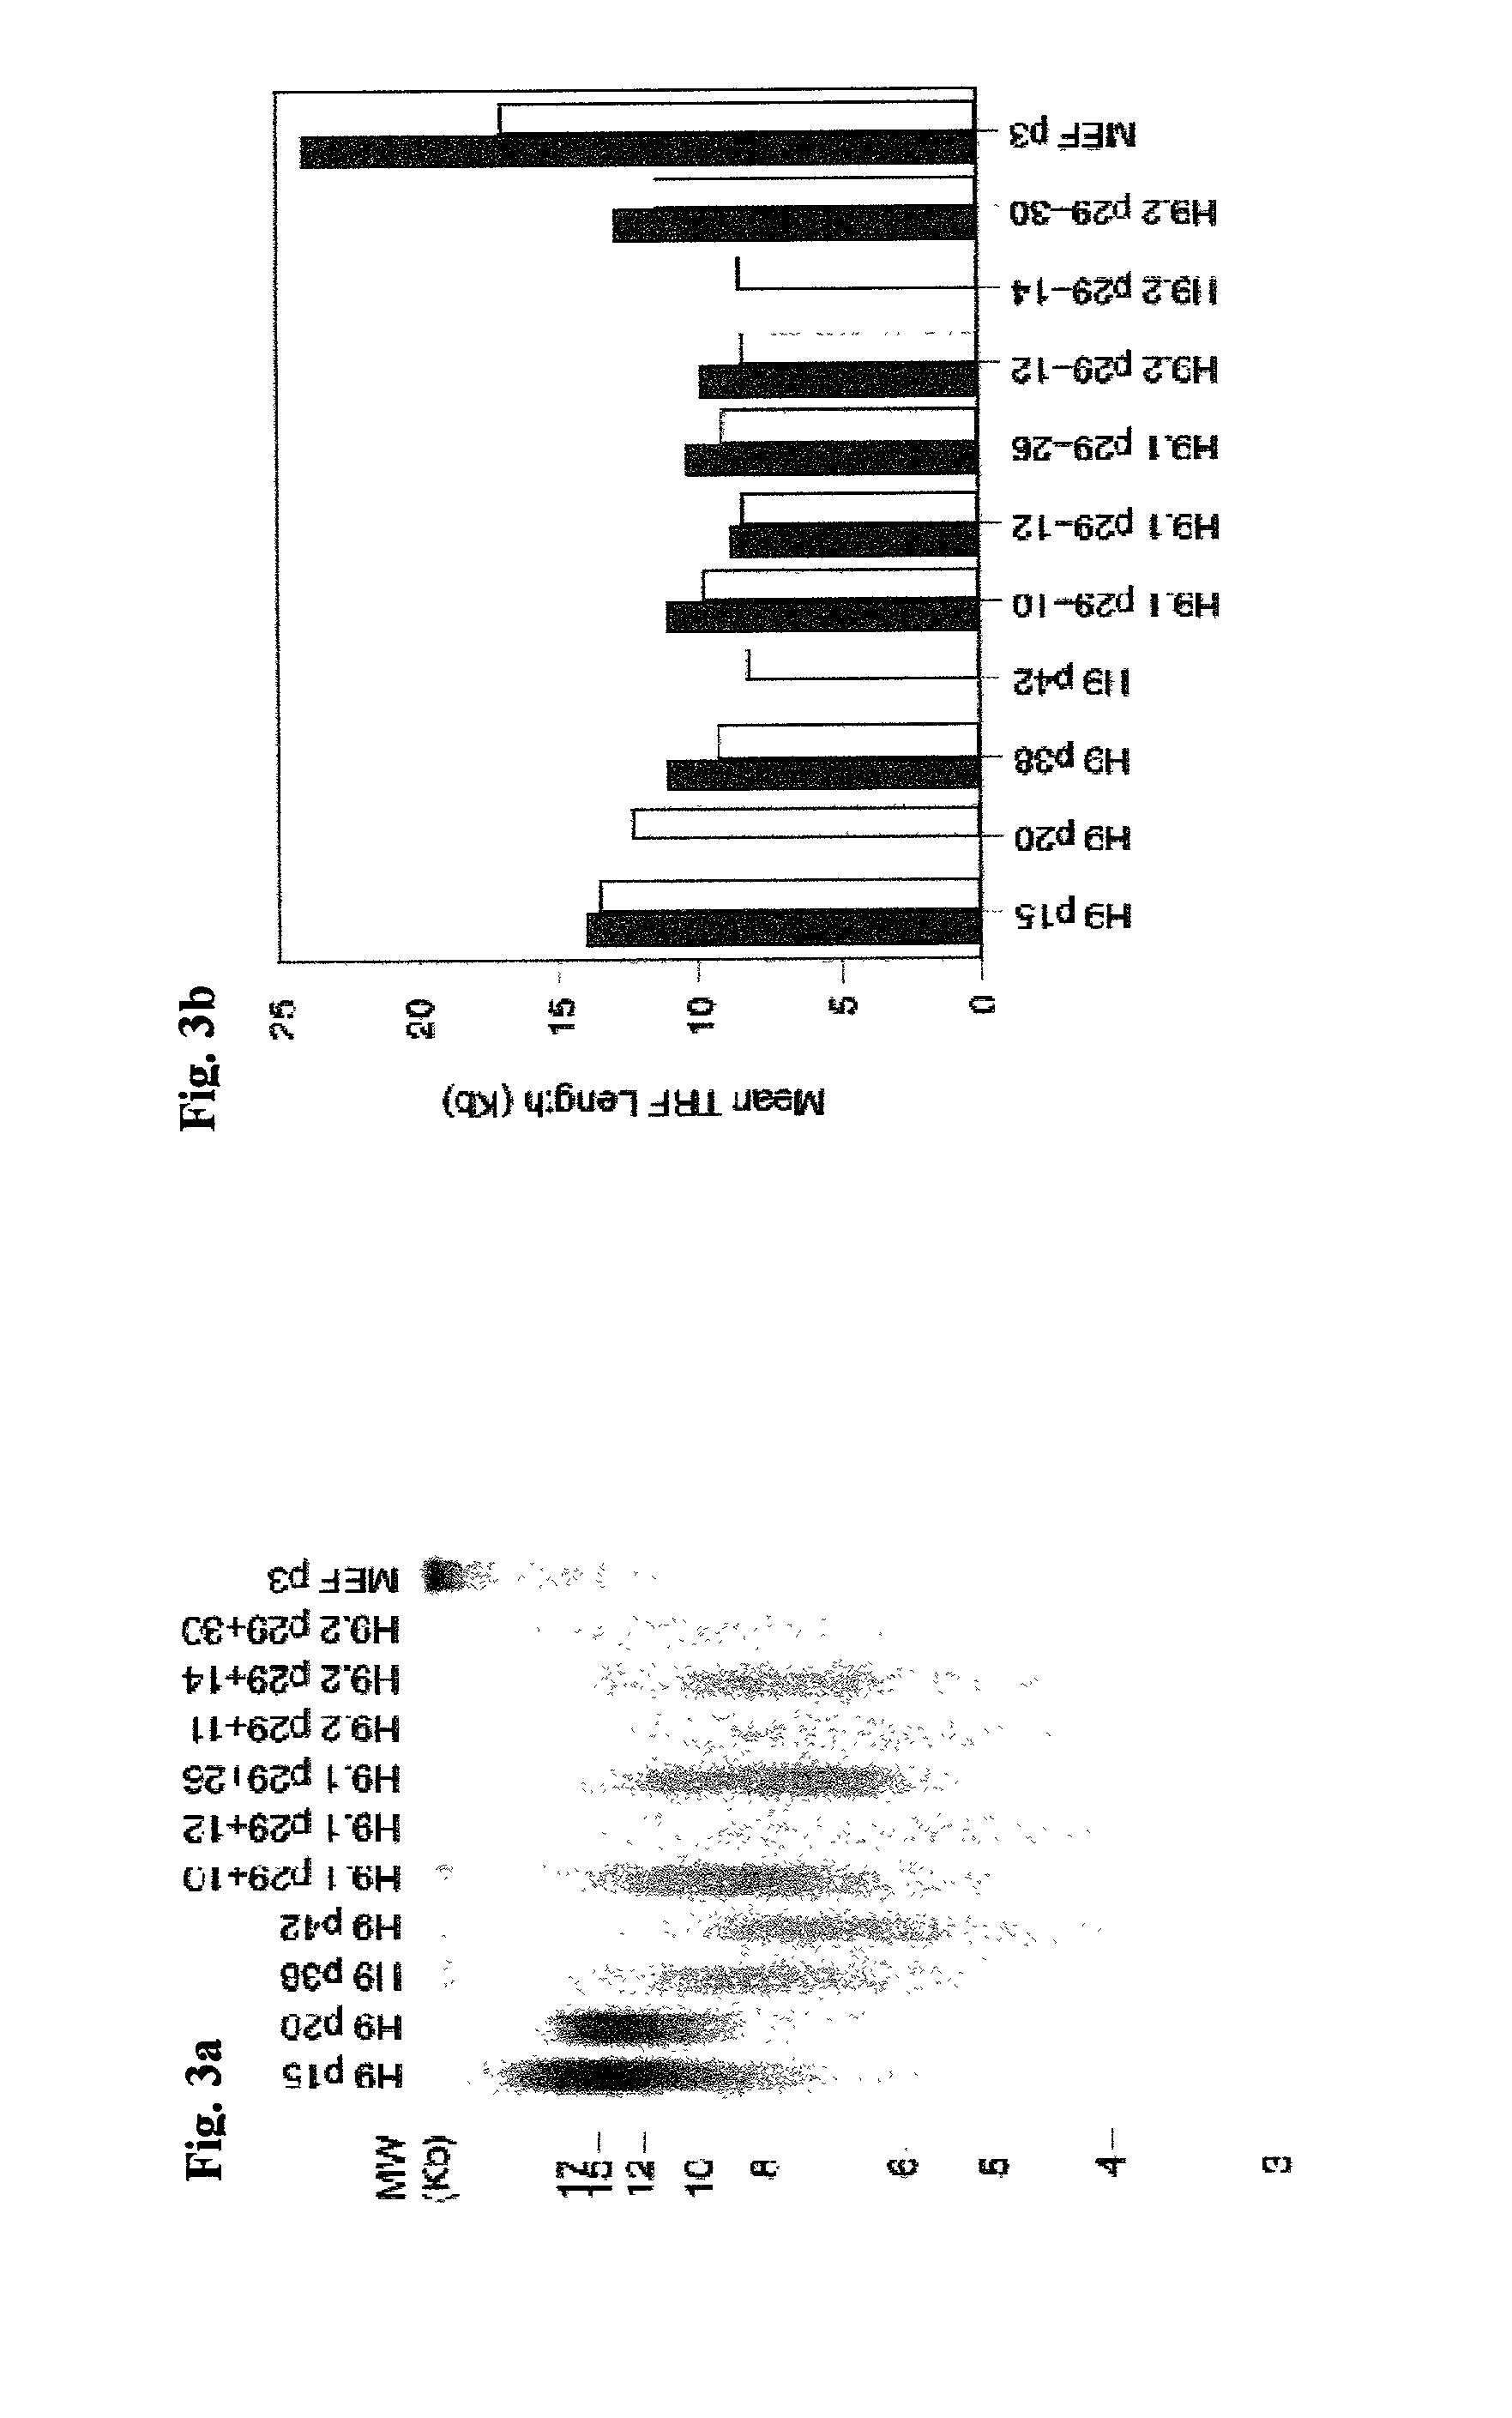 Clonal human embryonic stem cell lines and methods of generating same